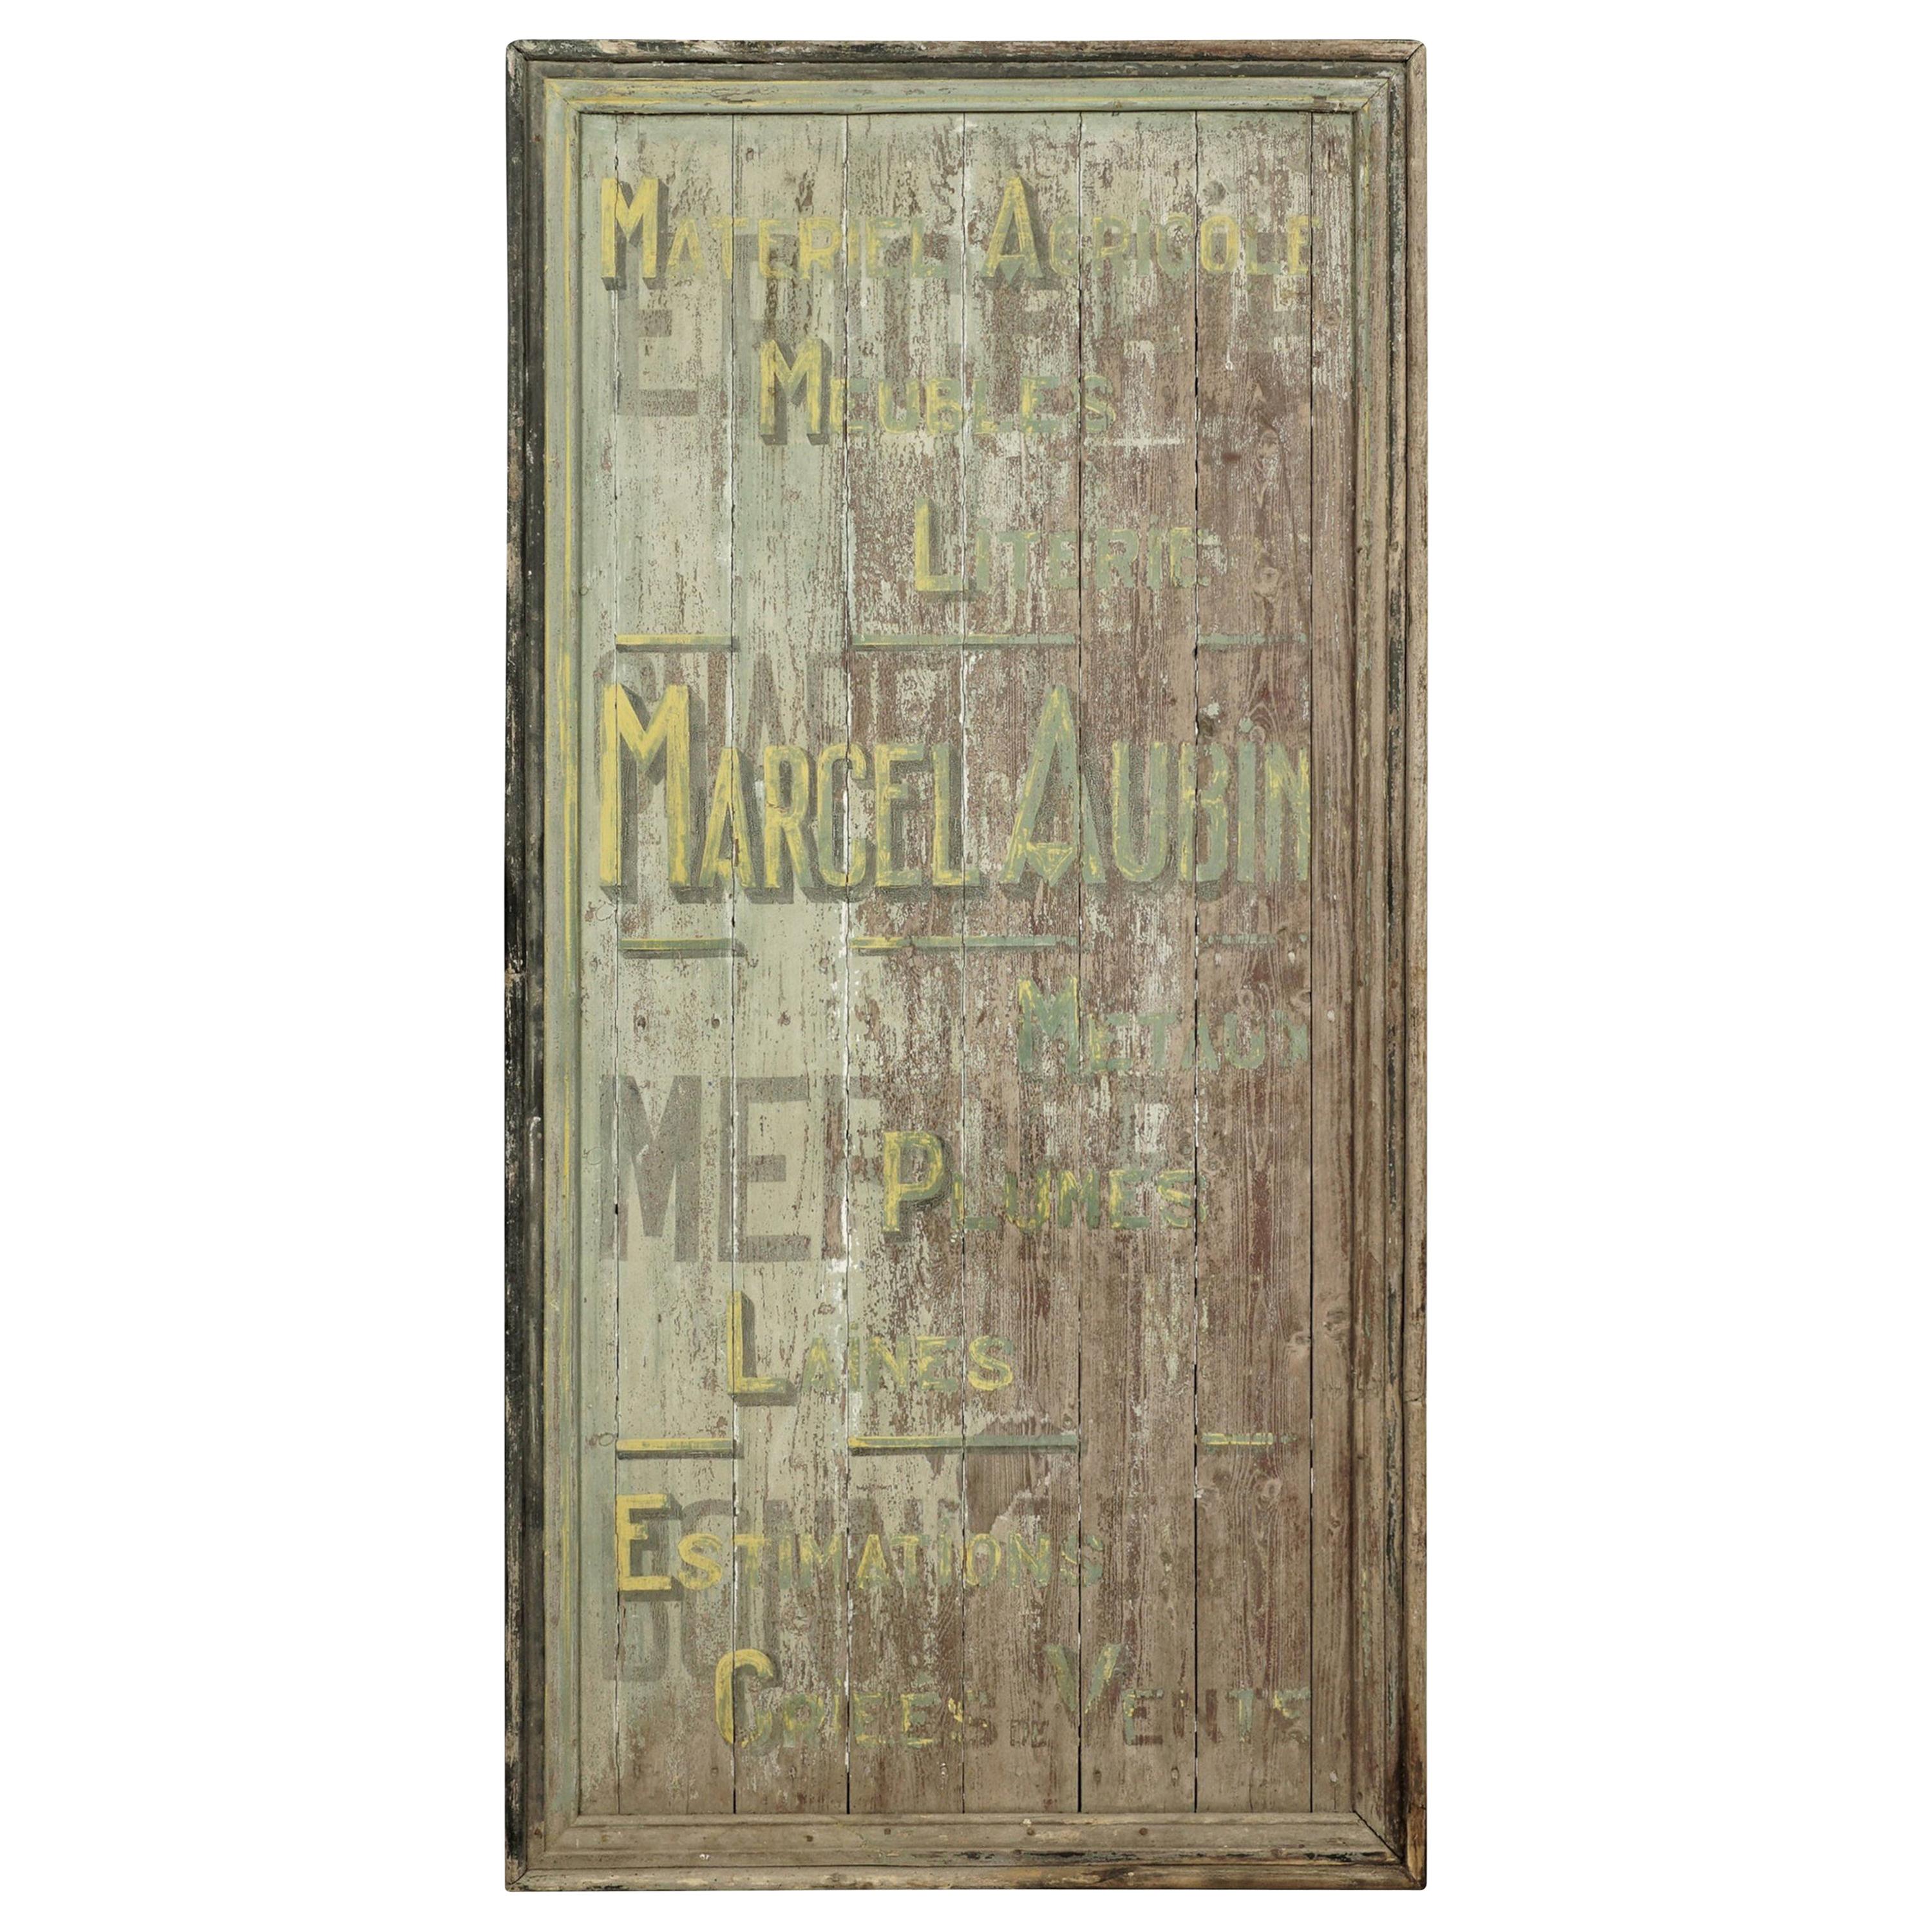 Rare Vintage Shop Sign from France, circa 1880 For Sale